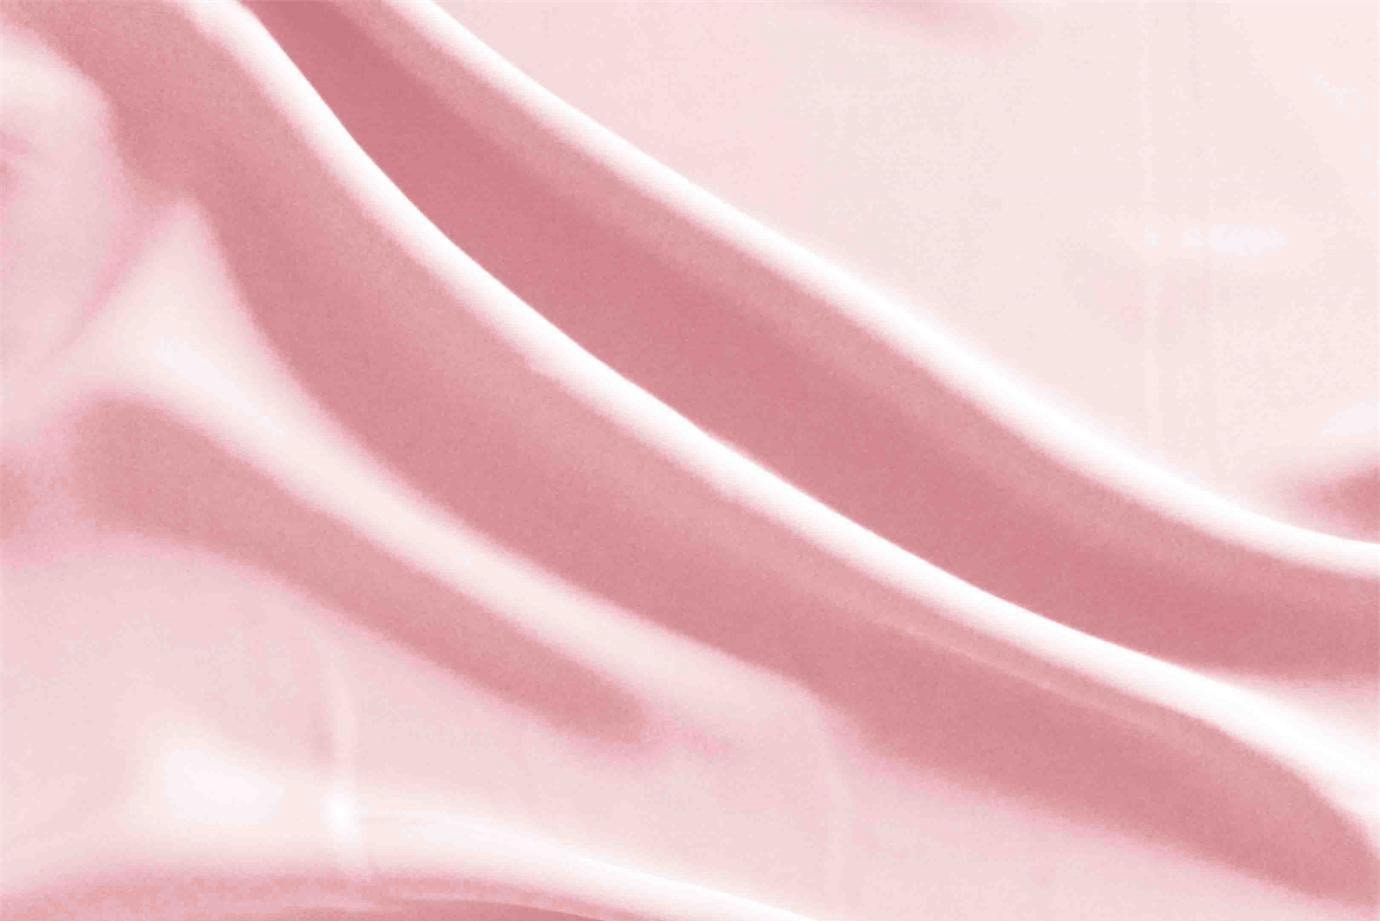 Baby Pink Polyester Smooth Microfiber fabric for dressmaking